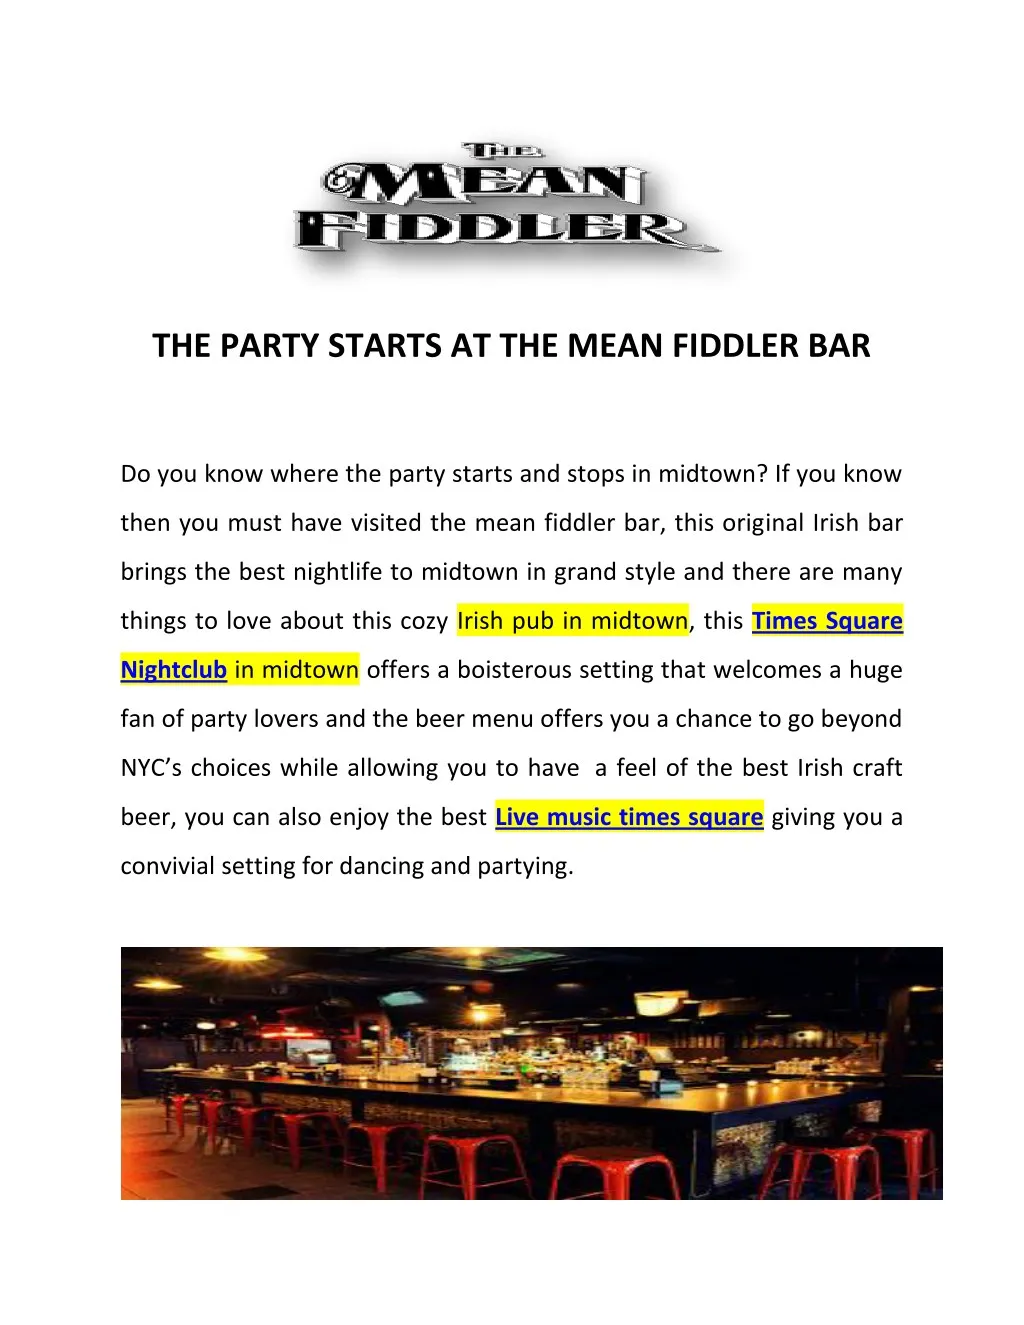 the party starts at the mean fiddler bar